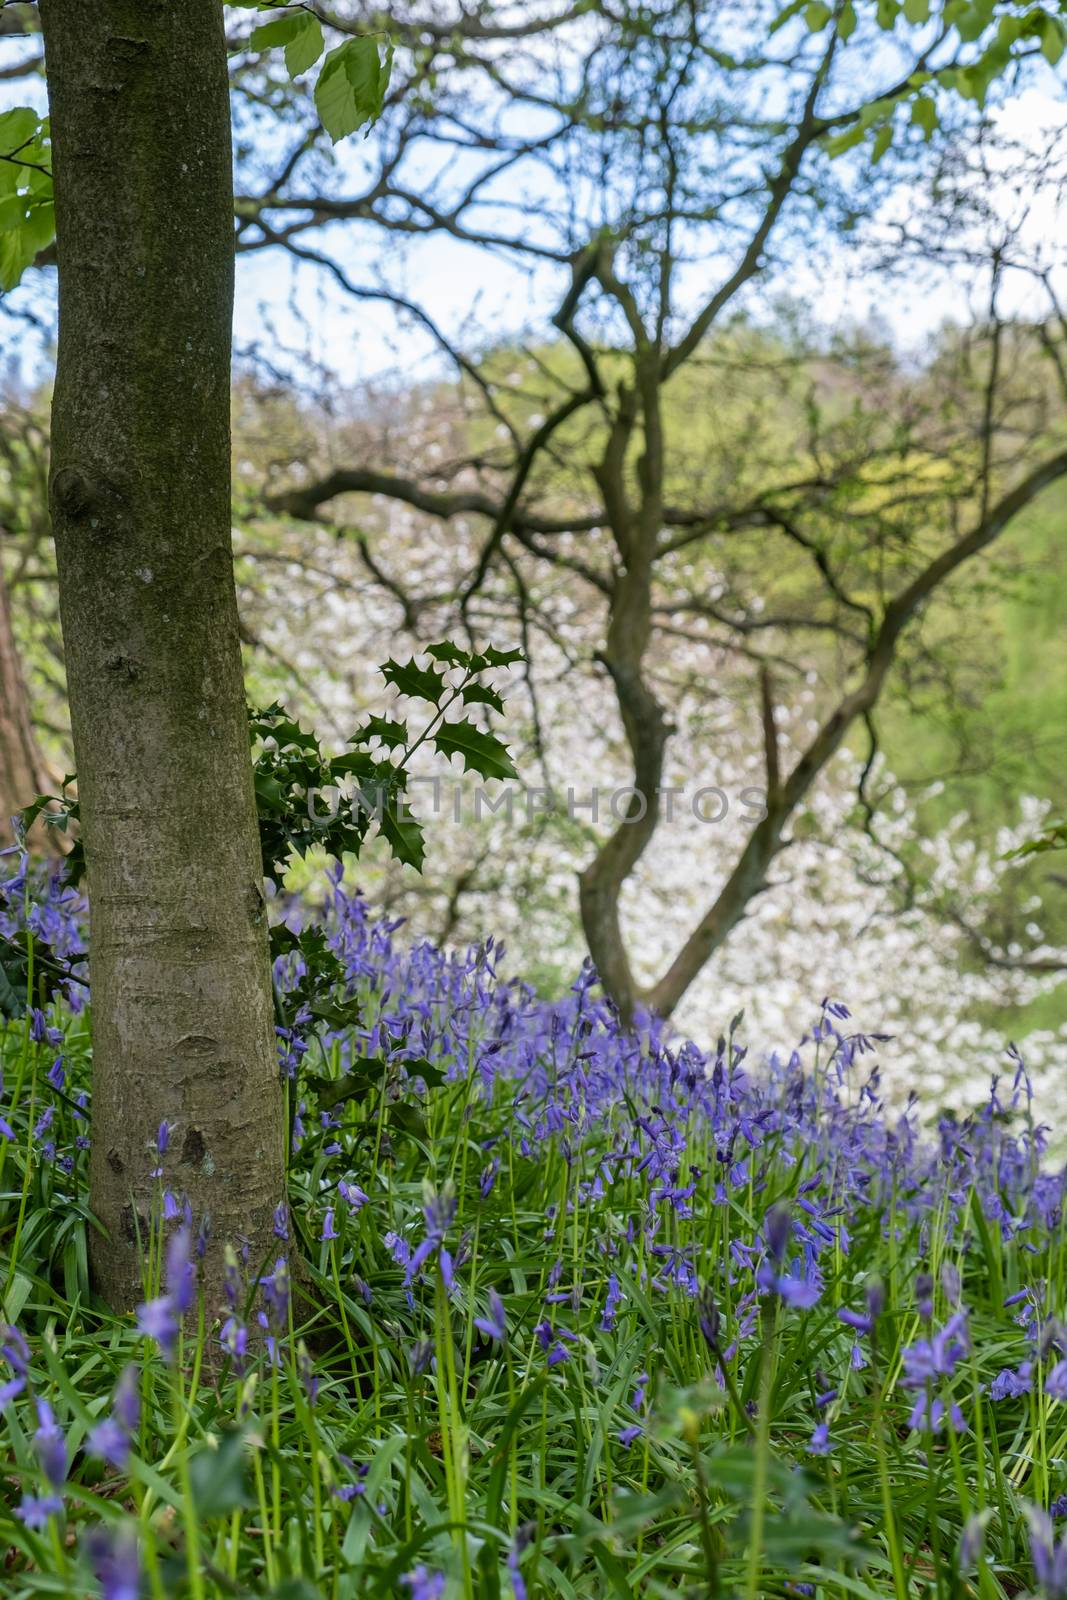 Carpet of bluebells at Beaconwood and the Winsel